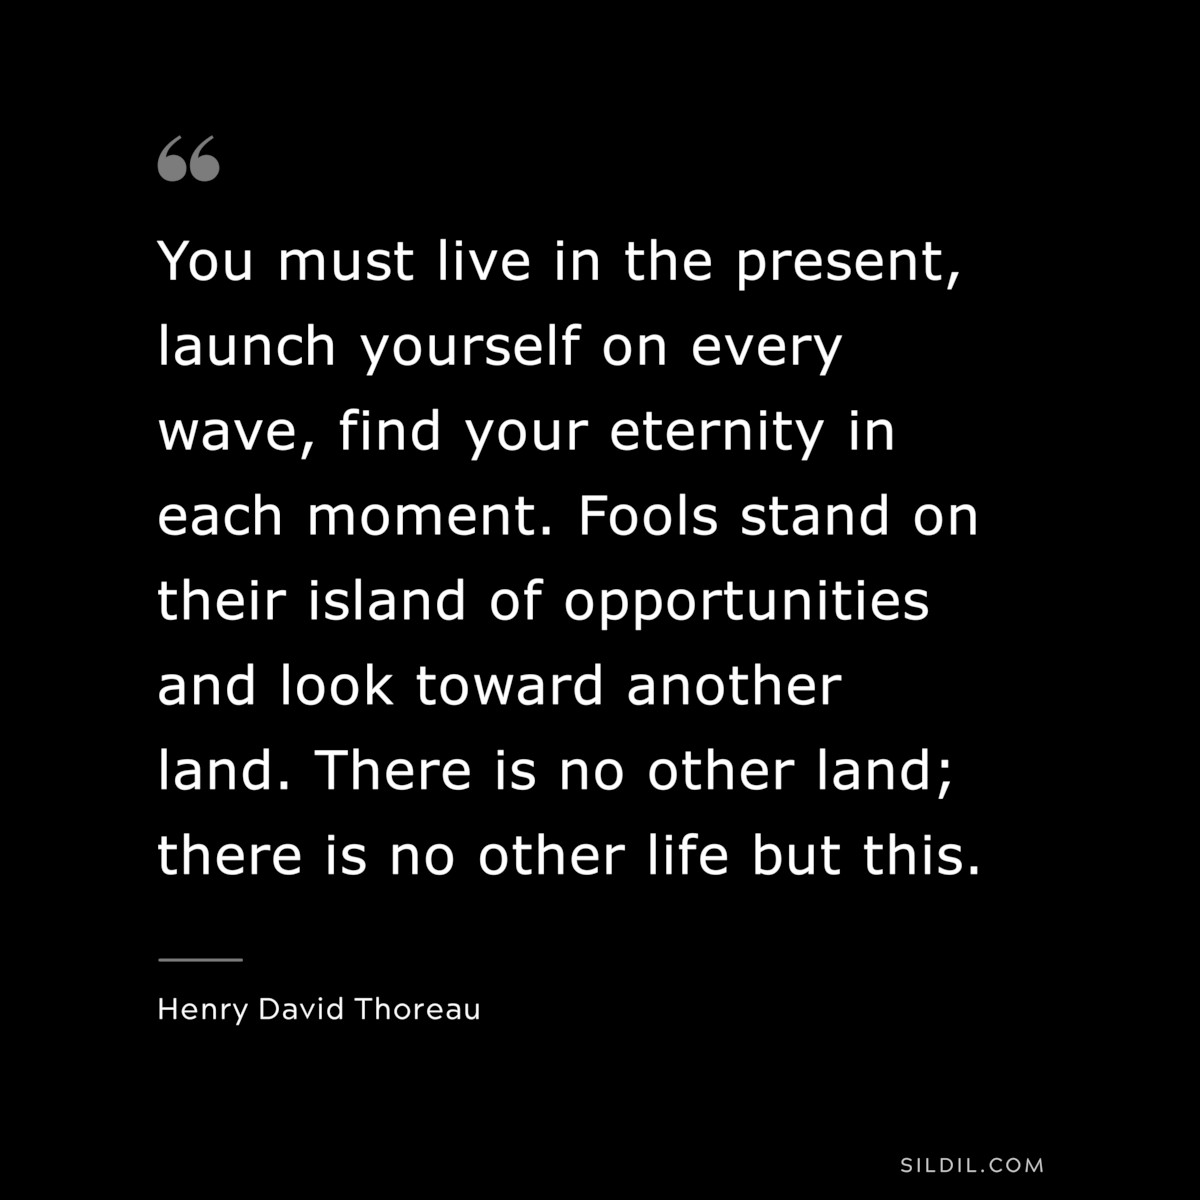 You must live in the present, launch yourself on every wave, find your eternity in each moment. Fools stand on their island of opportunities and look toward another land. There is no other land; there is no other life but this. — Henry David Thoreau